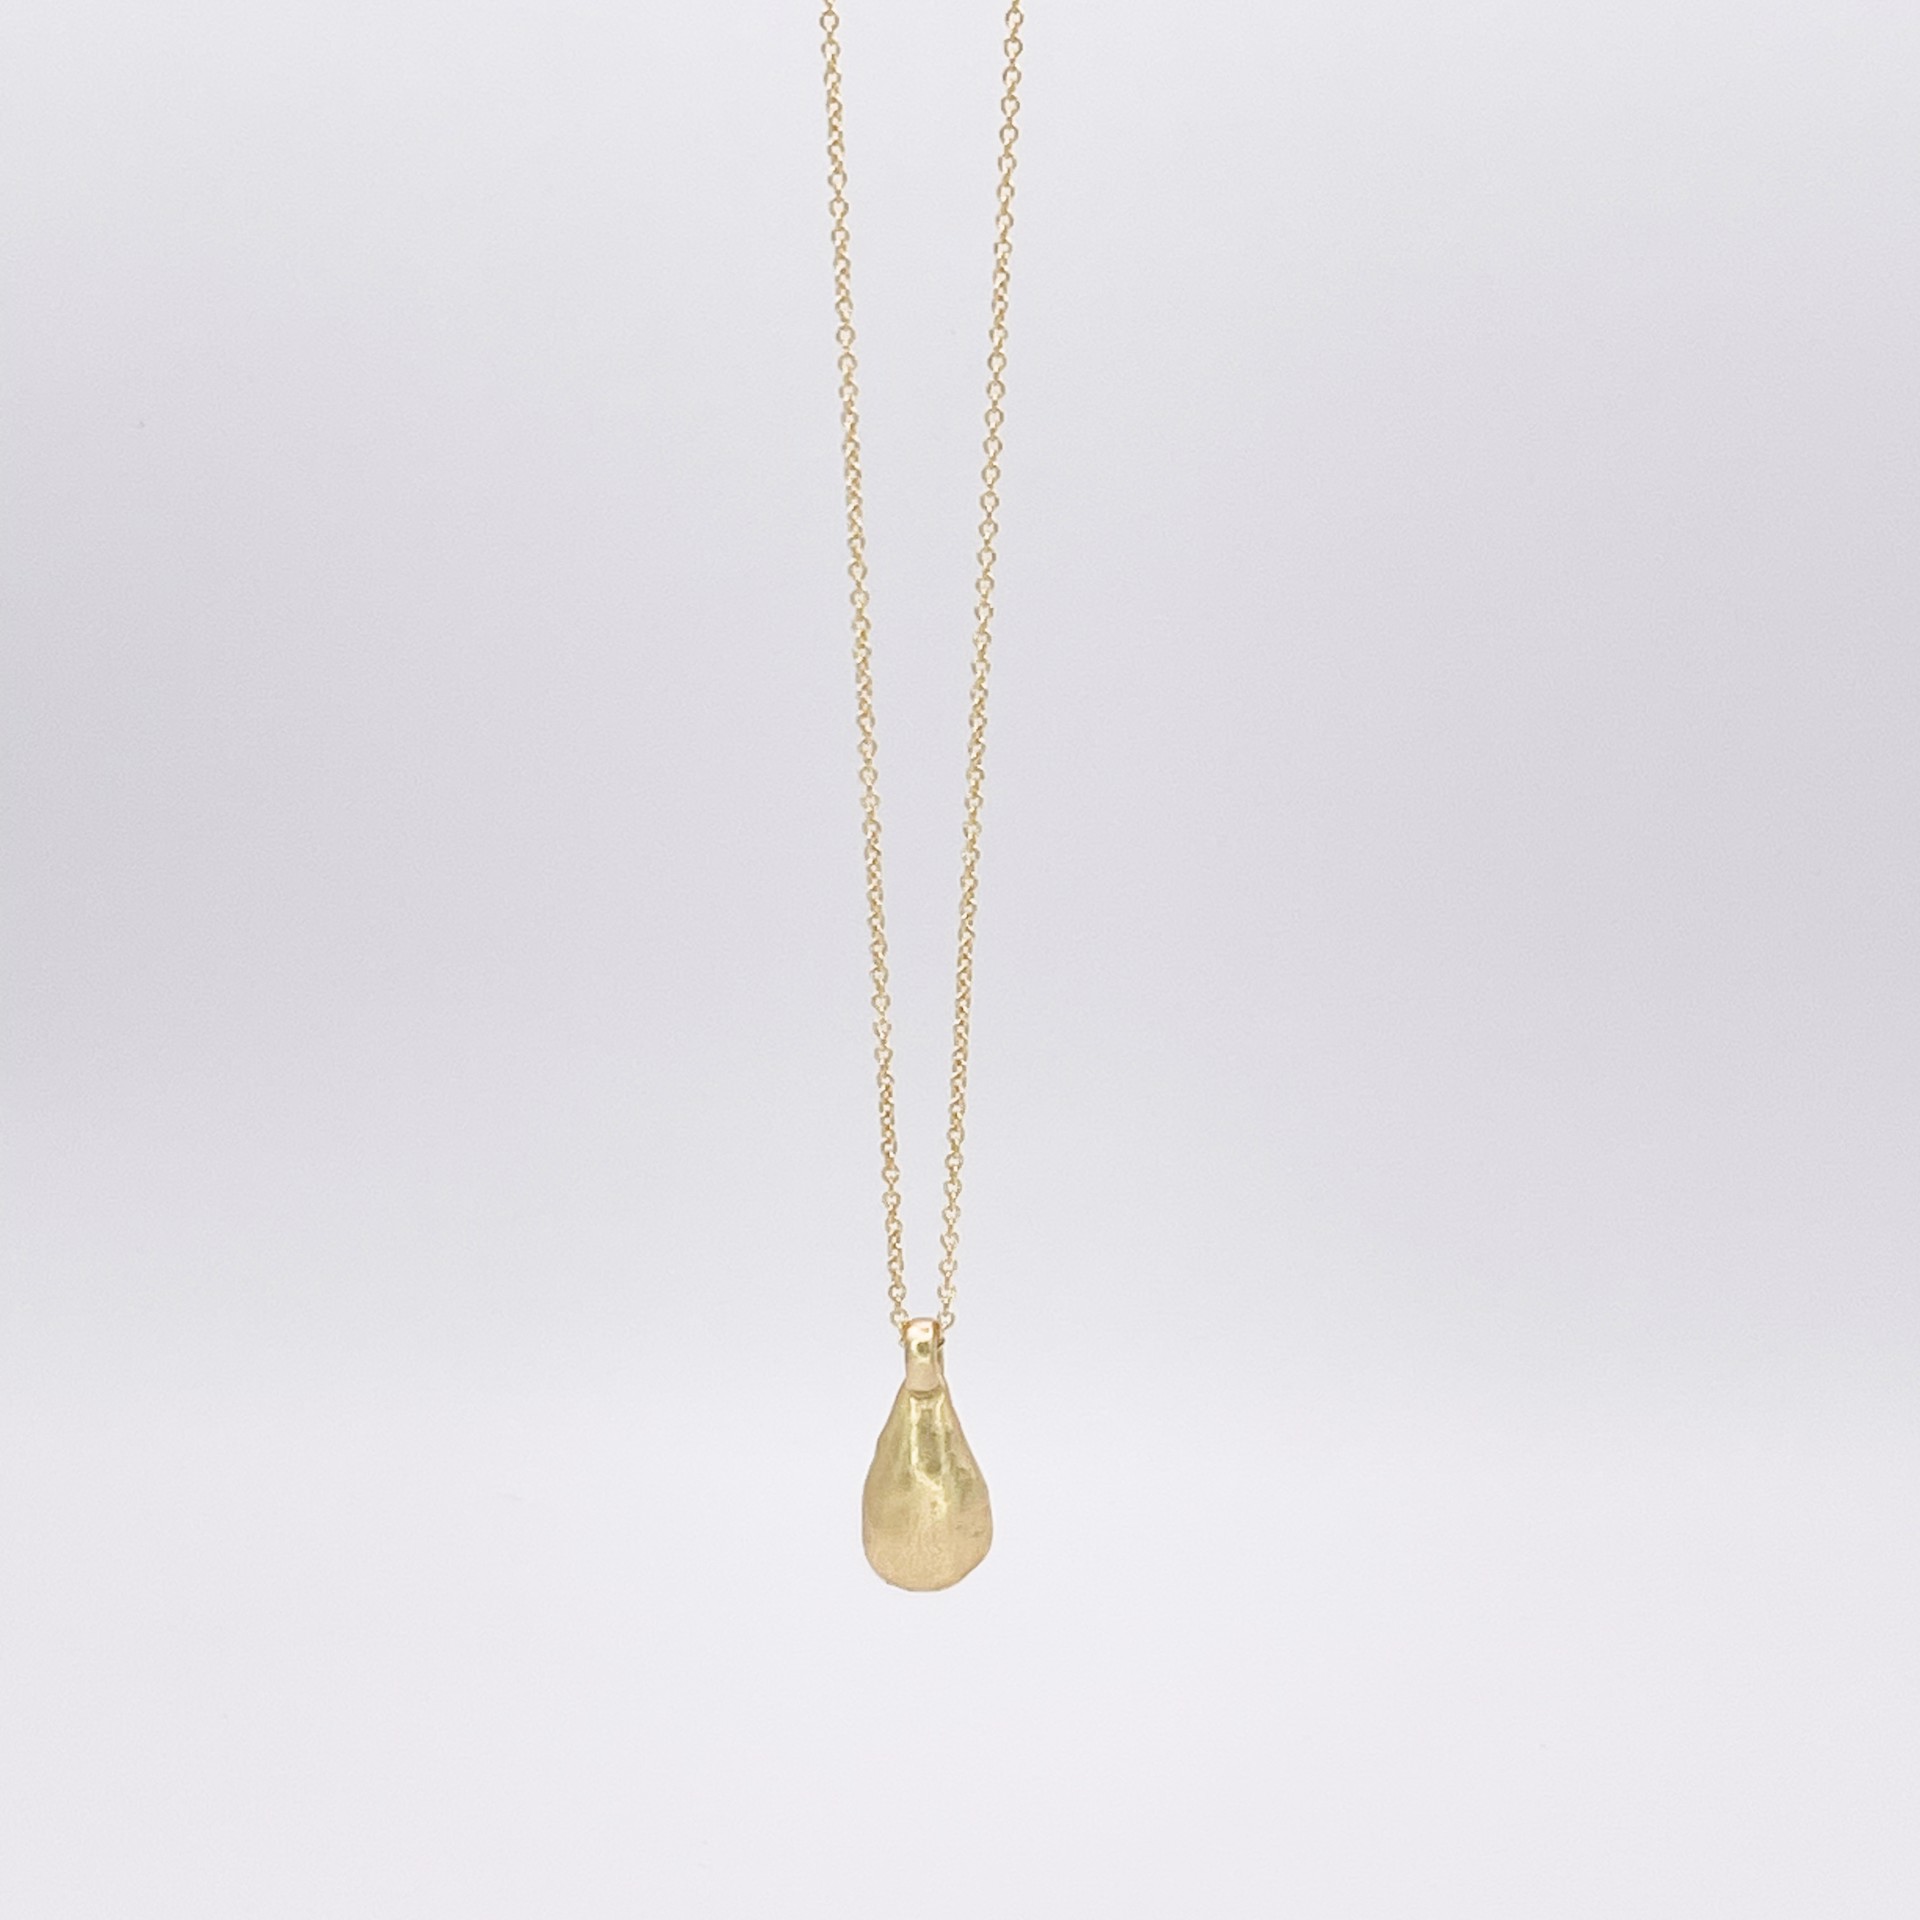 LHN03- Rounded Teardrop Necklace 18k gold by Leandra Hill